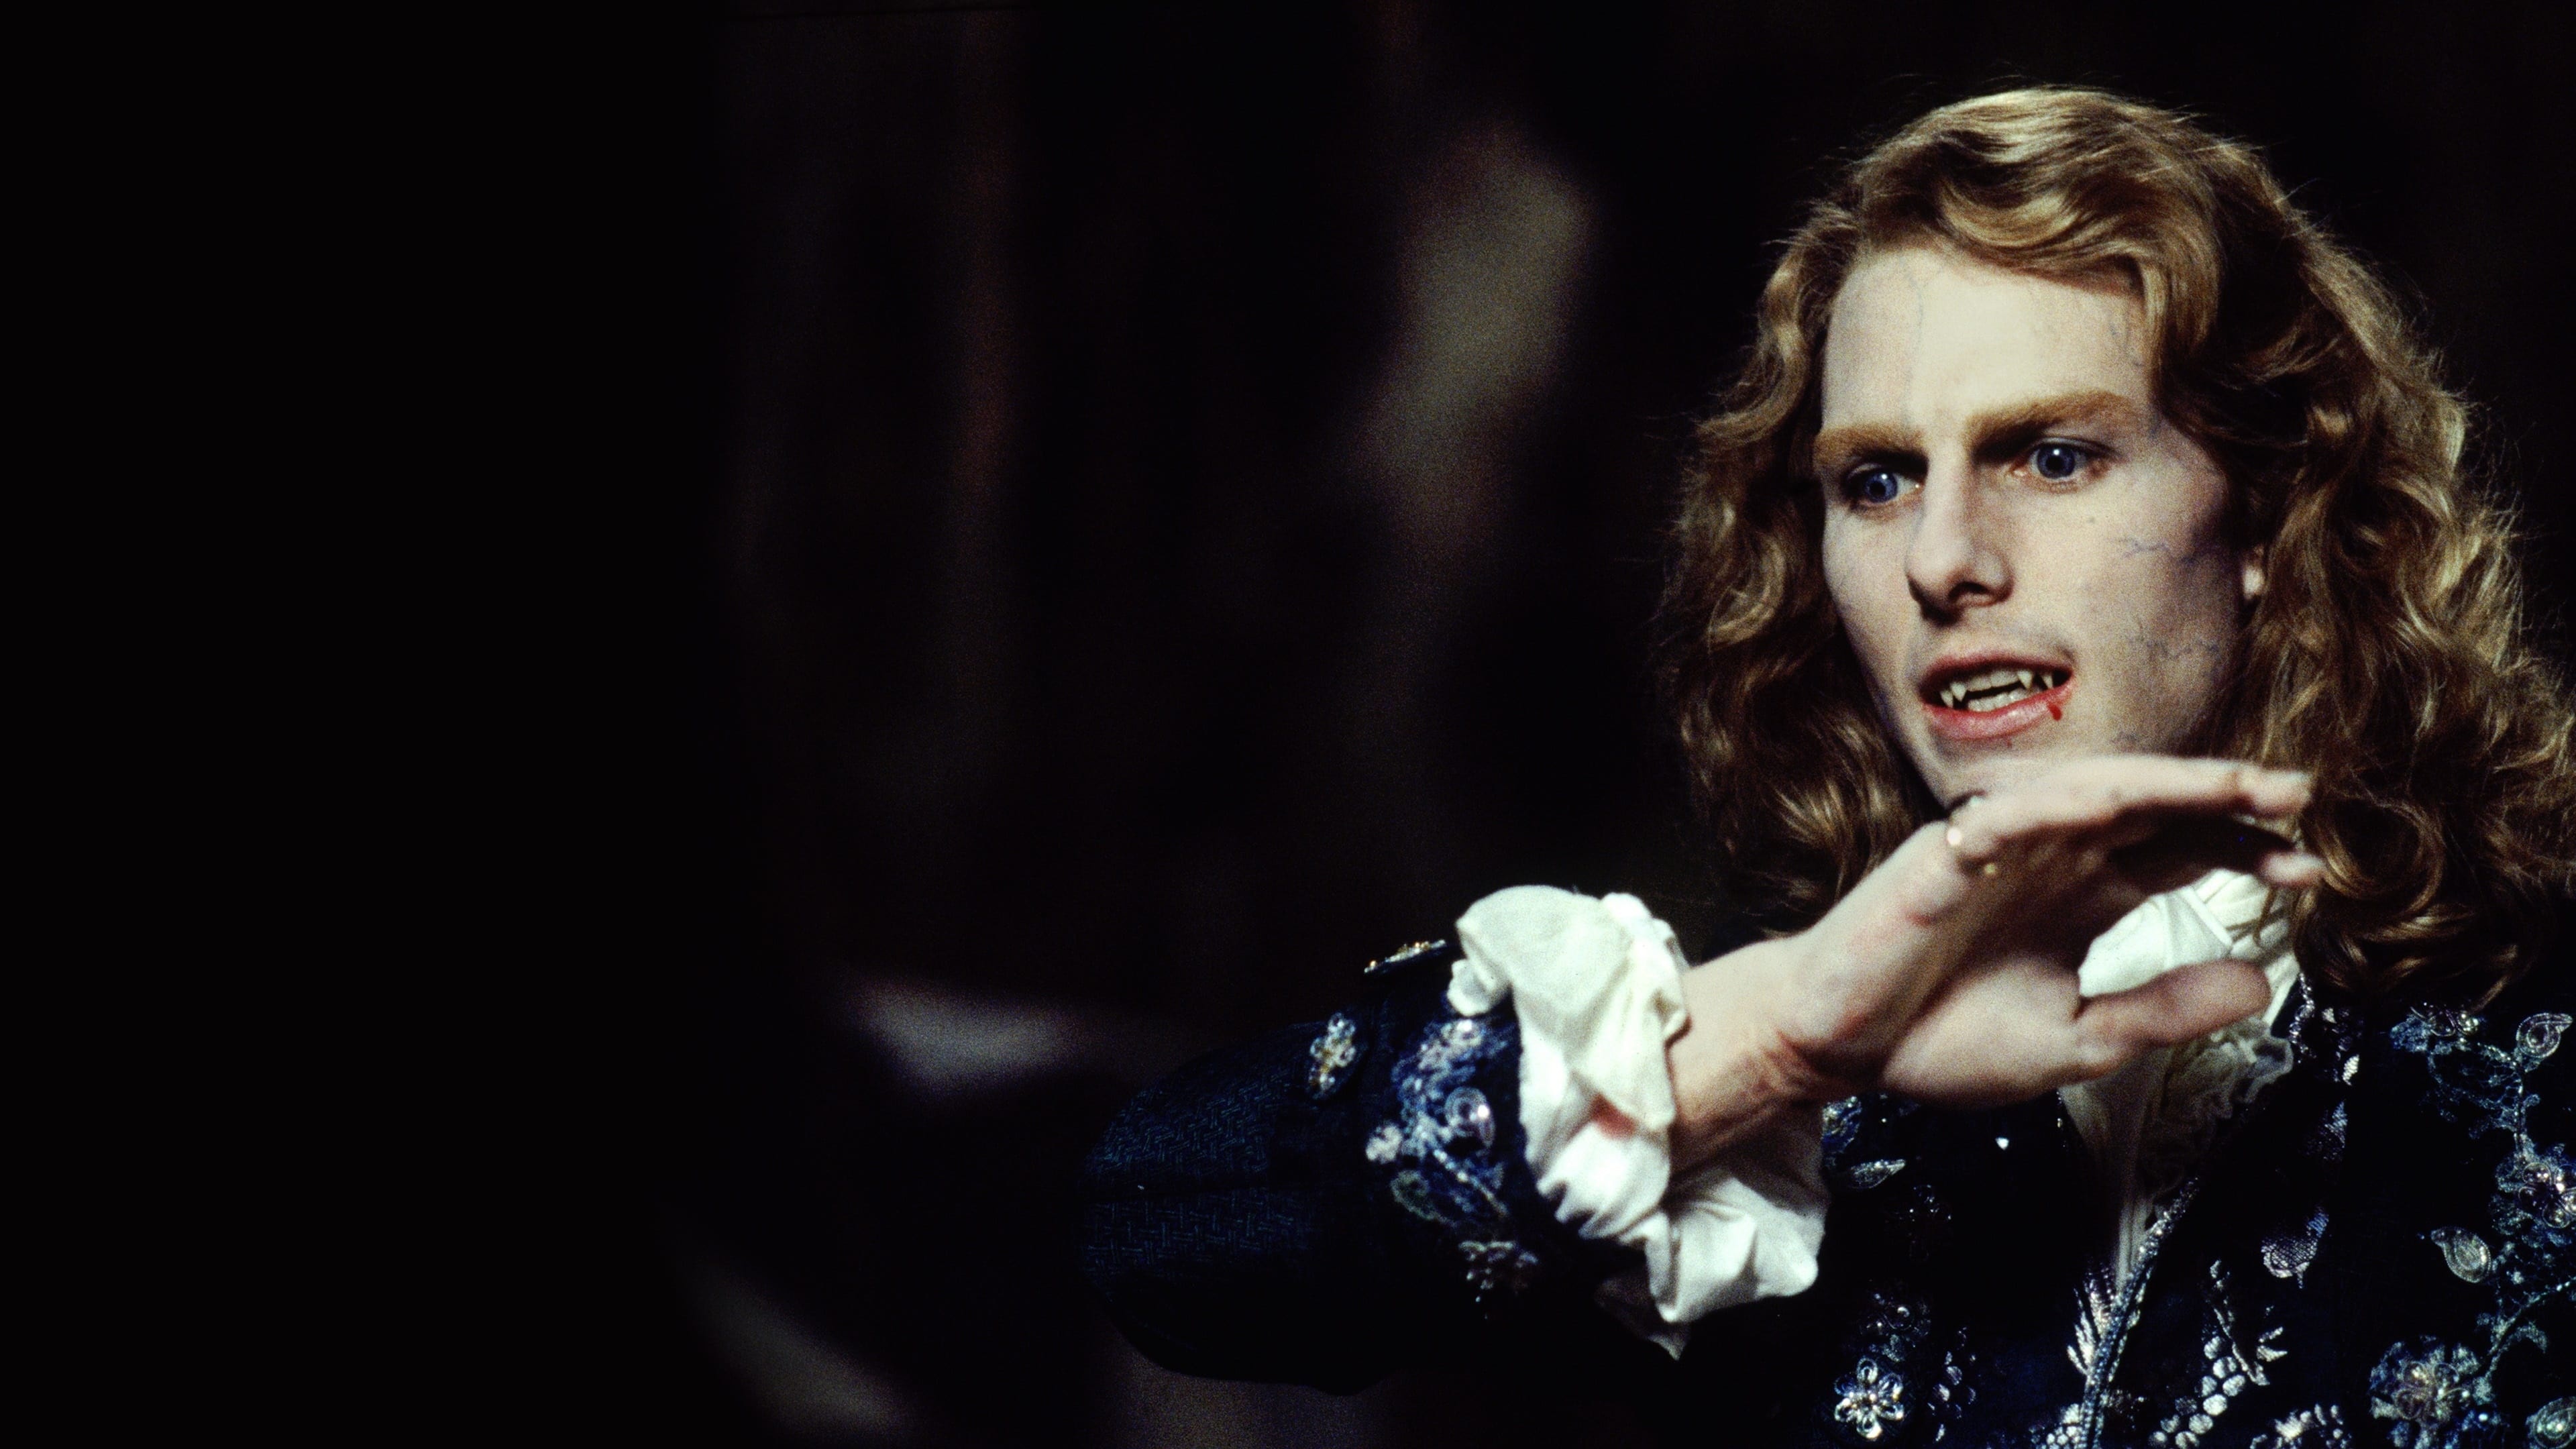 Interview with the Vampire: Tom Cruise as Lestat de Lioncourt, a vampire and an antihero of the story. 3840x2160 4K Background.